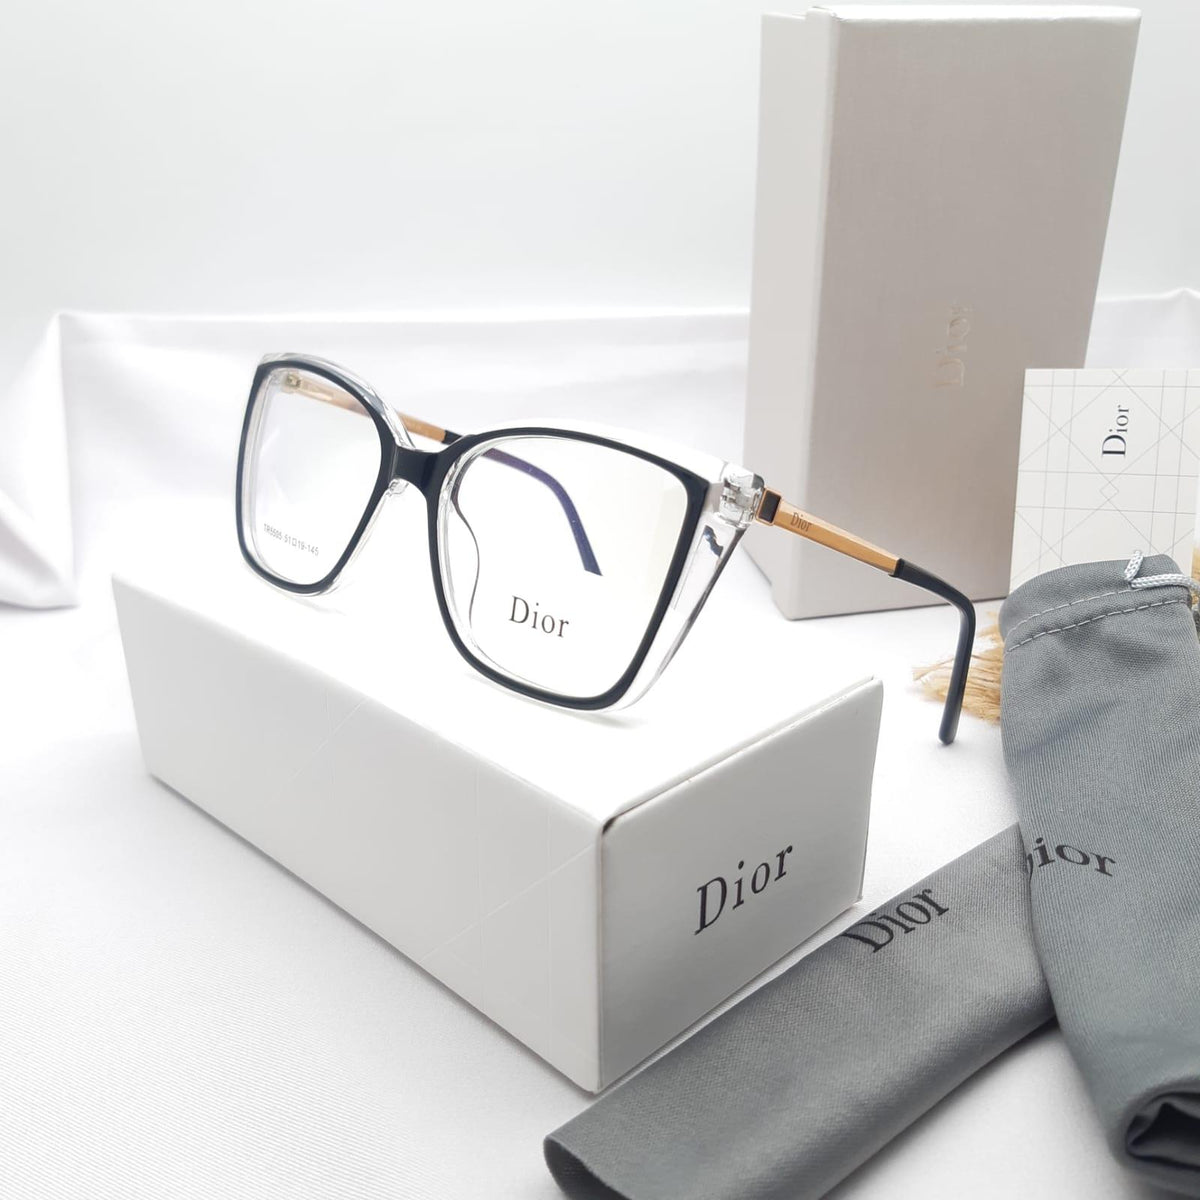 Dior spectacle - Customized Prescription Sunglasses and Spectacles